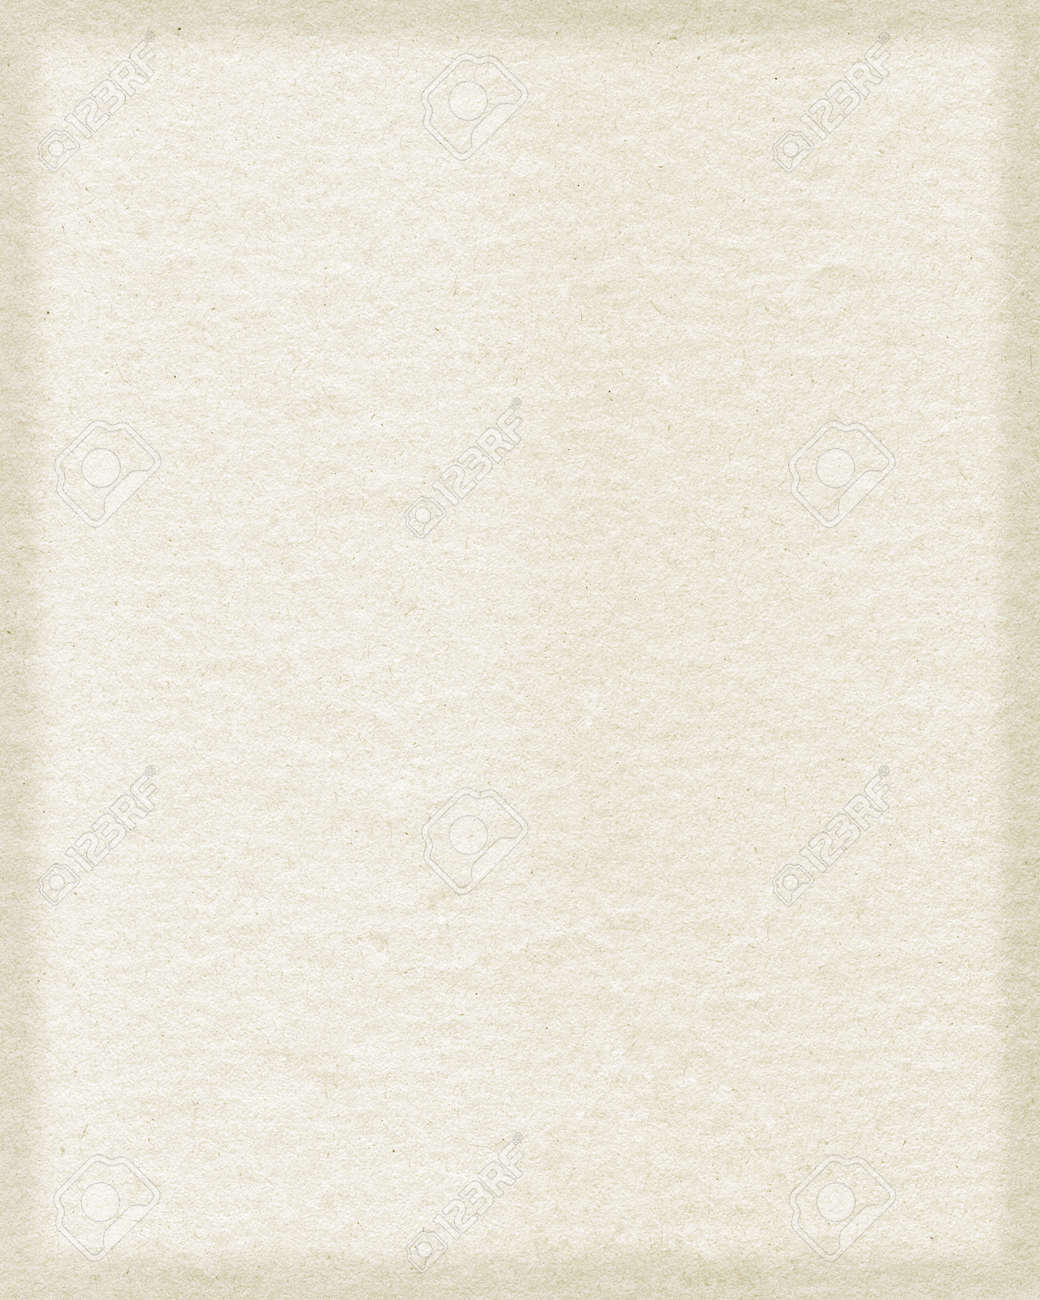 Scanned Section Of Paper For Use As Backgrounds Stock Photo